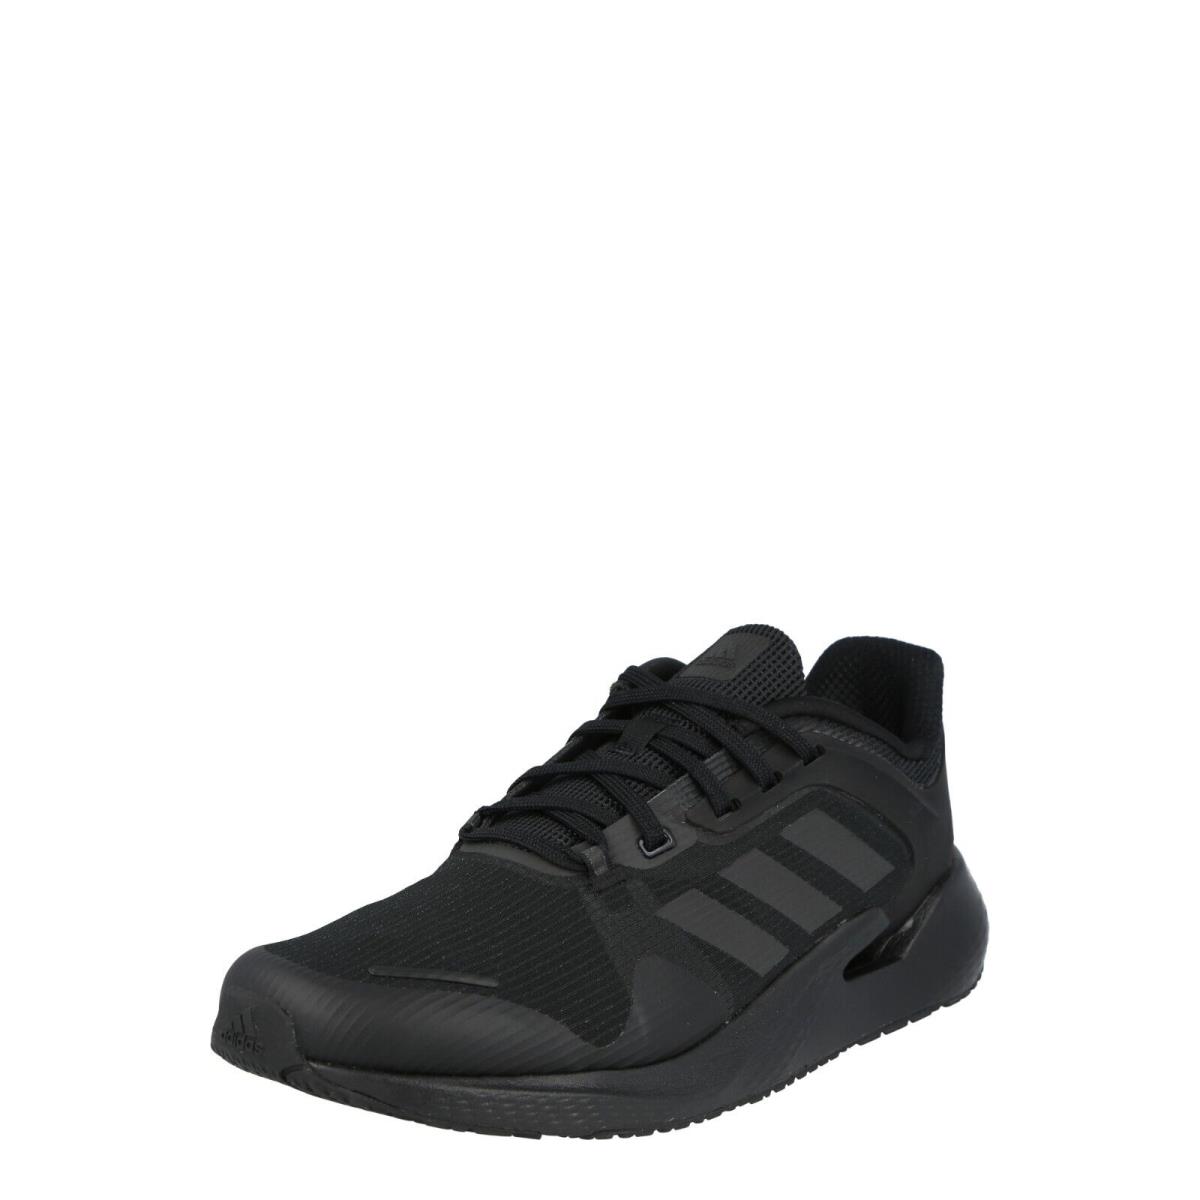 Adidas Mens Alphatorsion Trainers Running Shoes - Black 11.5